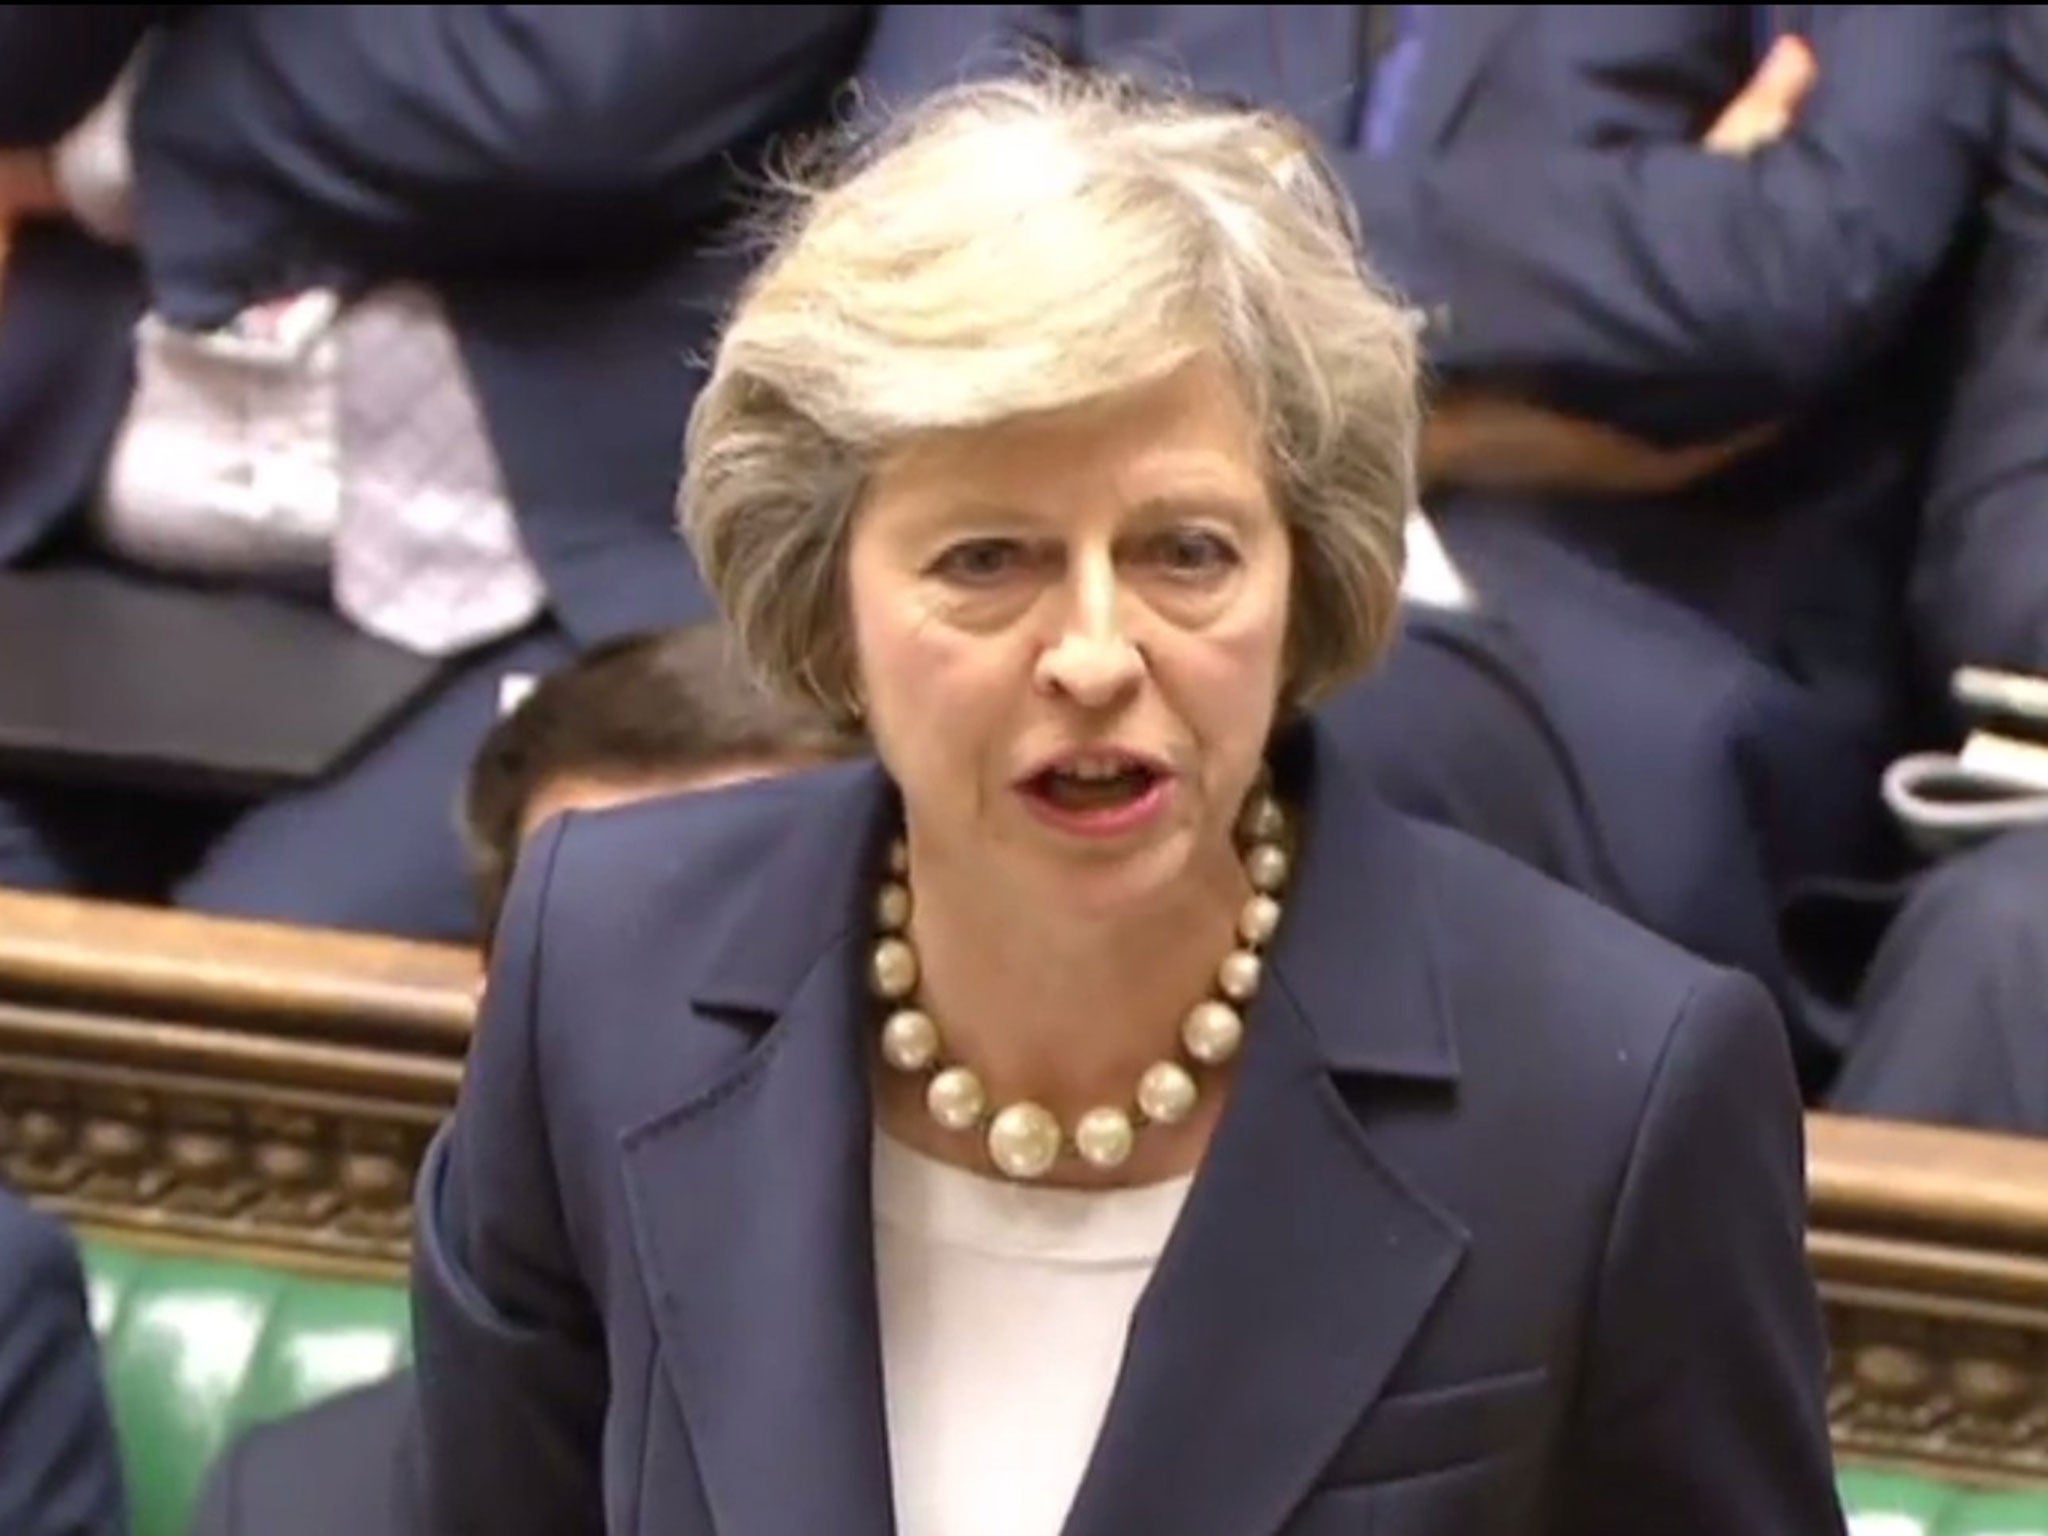 Theresa May speaking during Prime Ministers Questions at the House of Commons in London